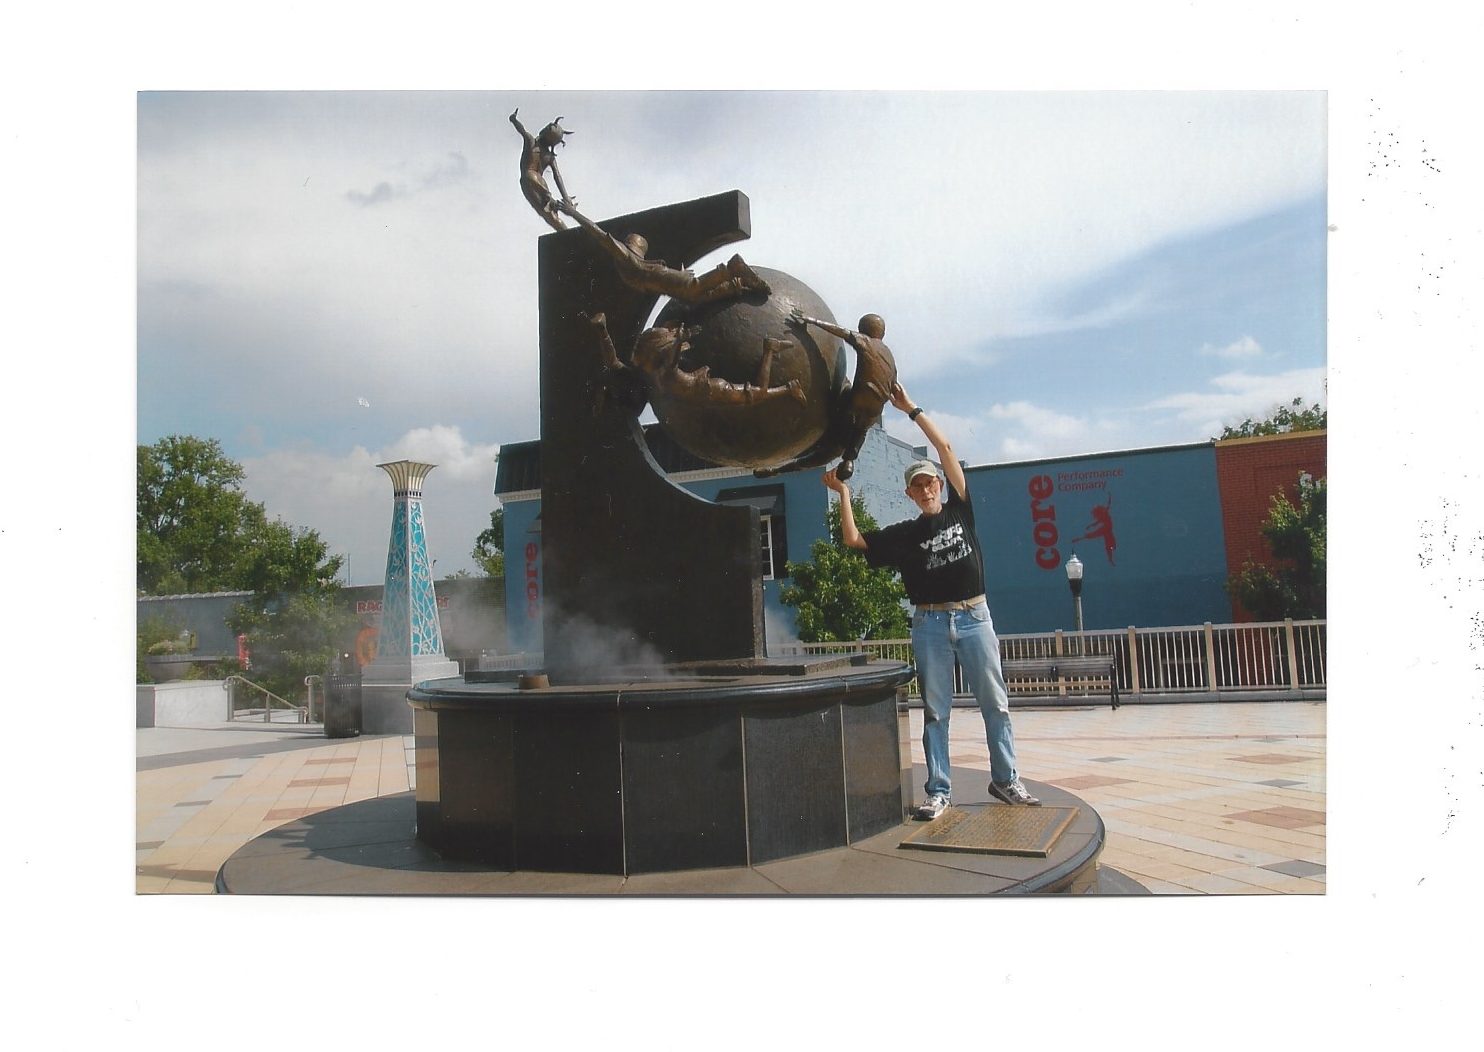 Brian Sherman, wearing blue jeans and black shirt while touching a large sculpture